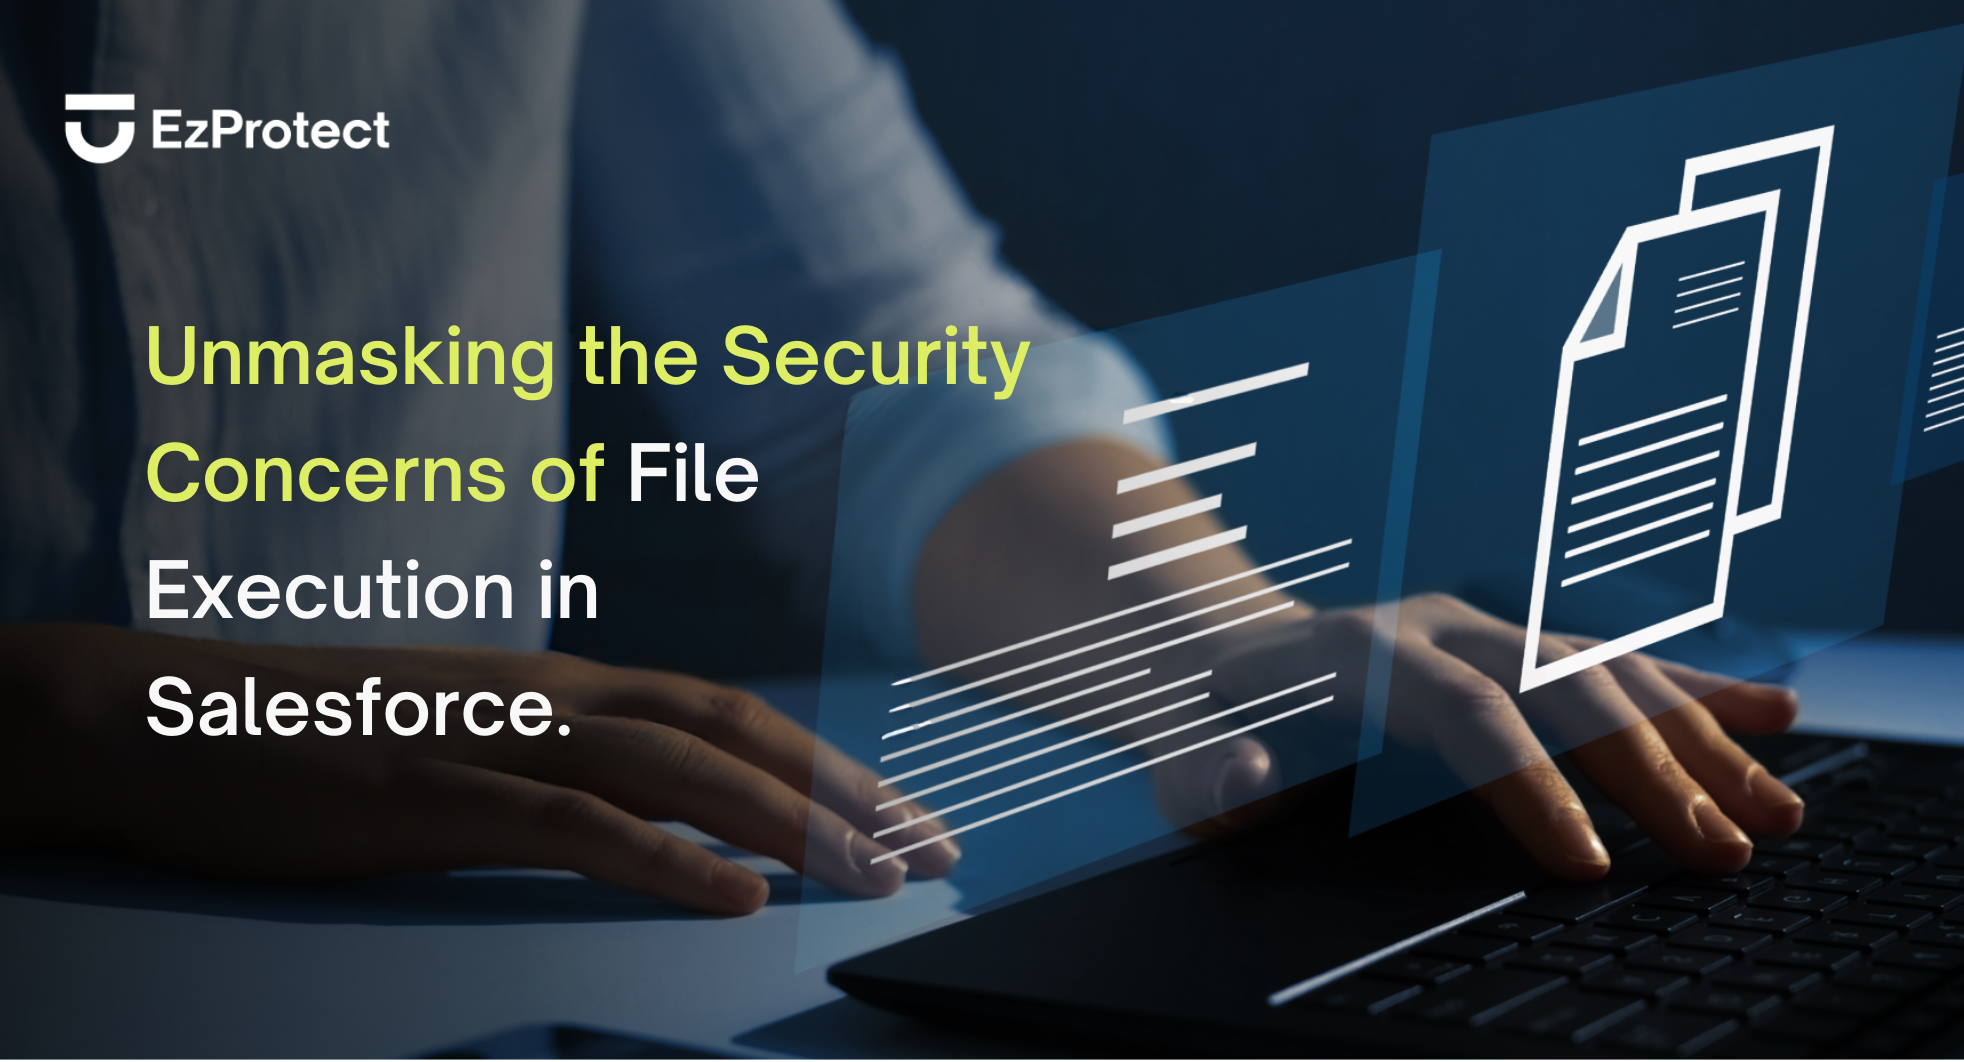 Common Misconceptions About Malicious Files Exploiting Salesforce Community Portal Vulnerabilities